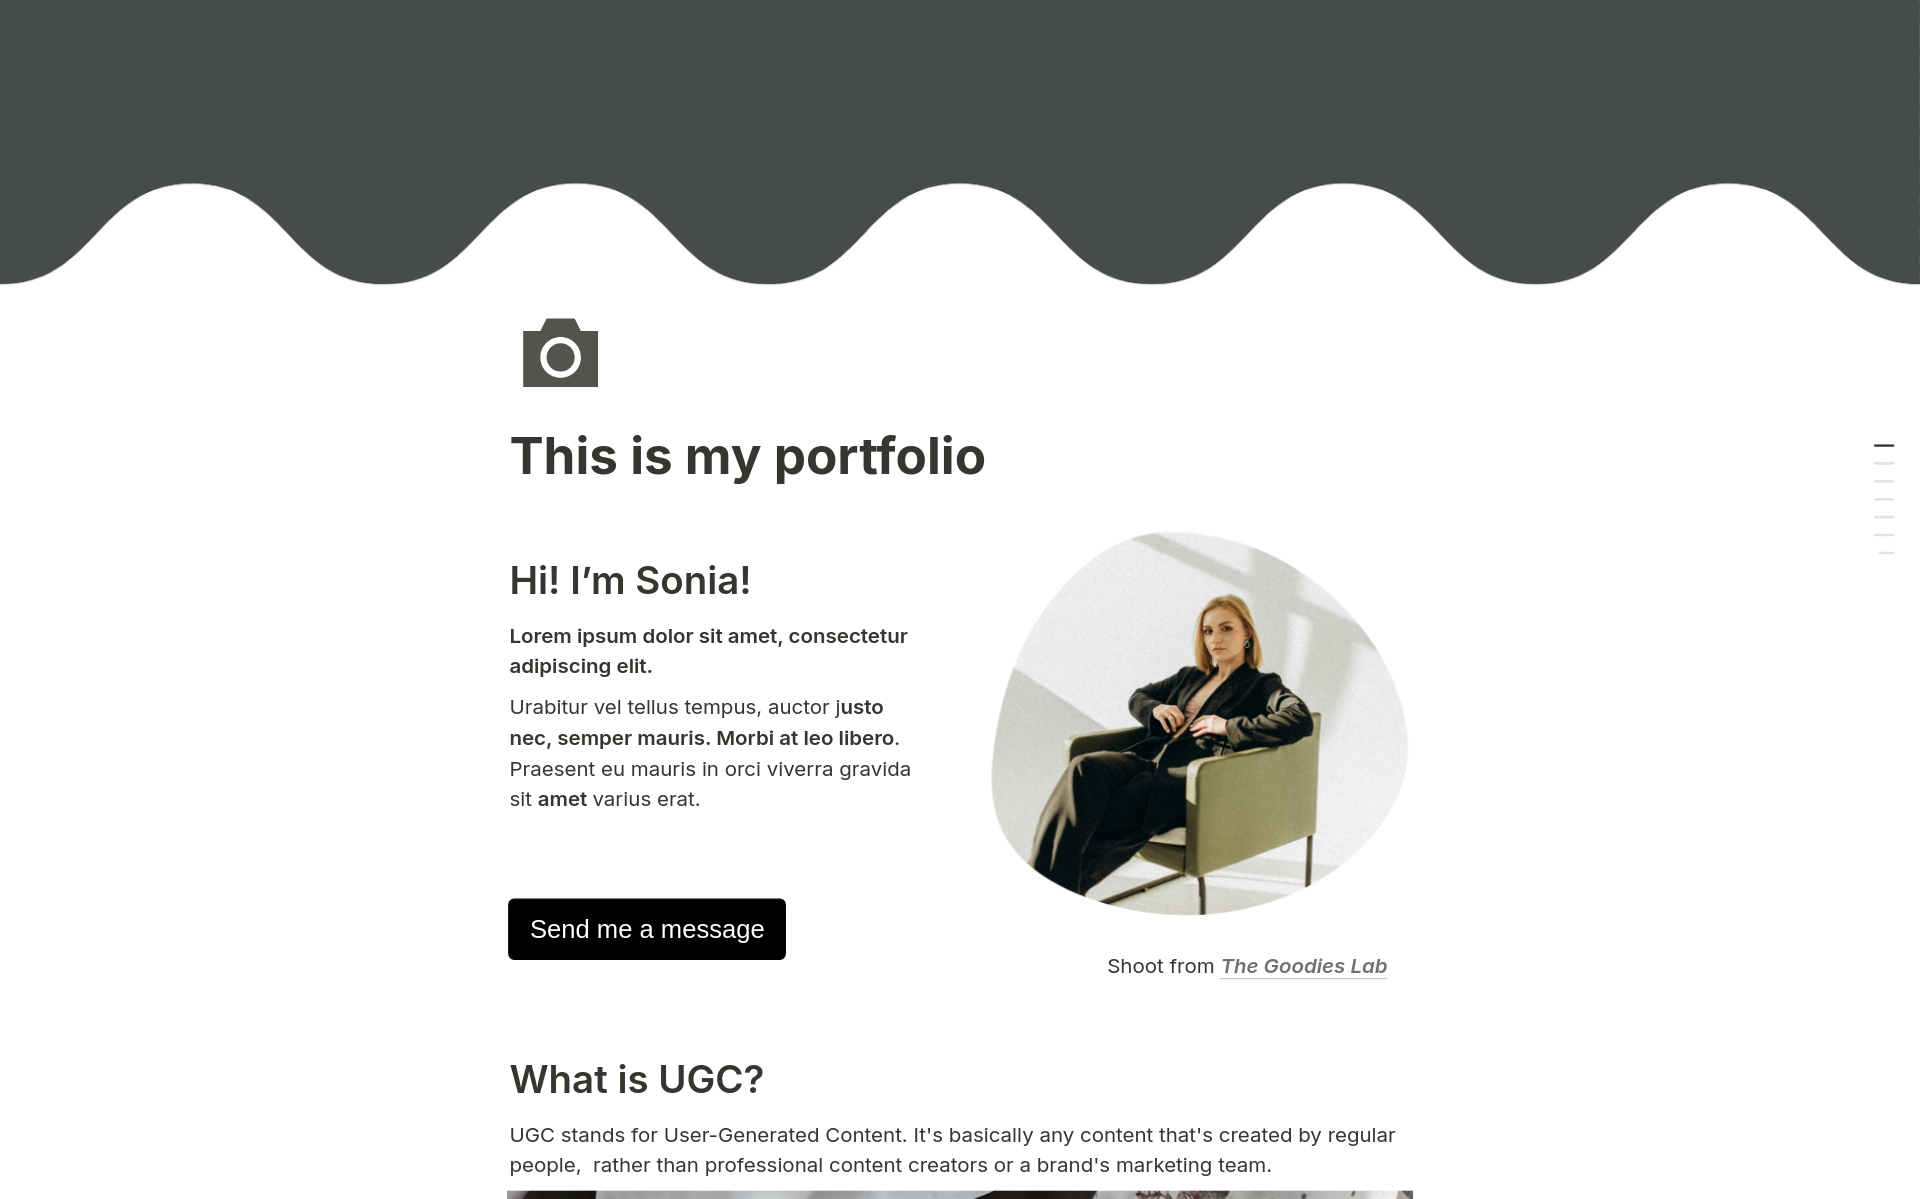 Captivate clients and showcase your UGC expertise with our Portfolio site template.